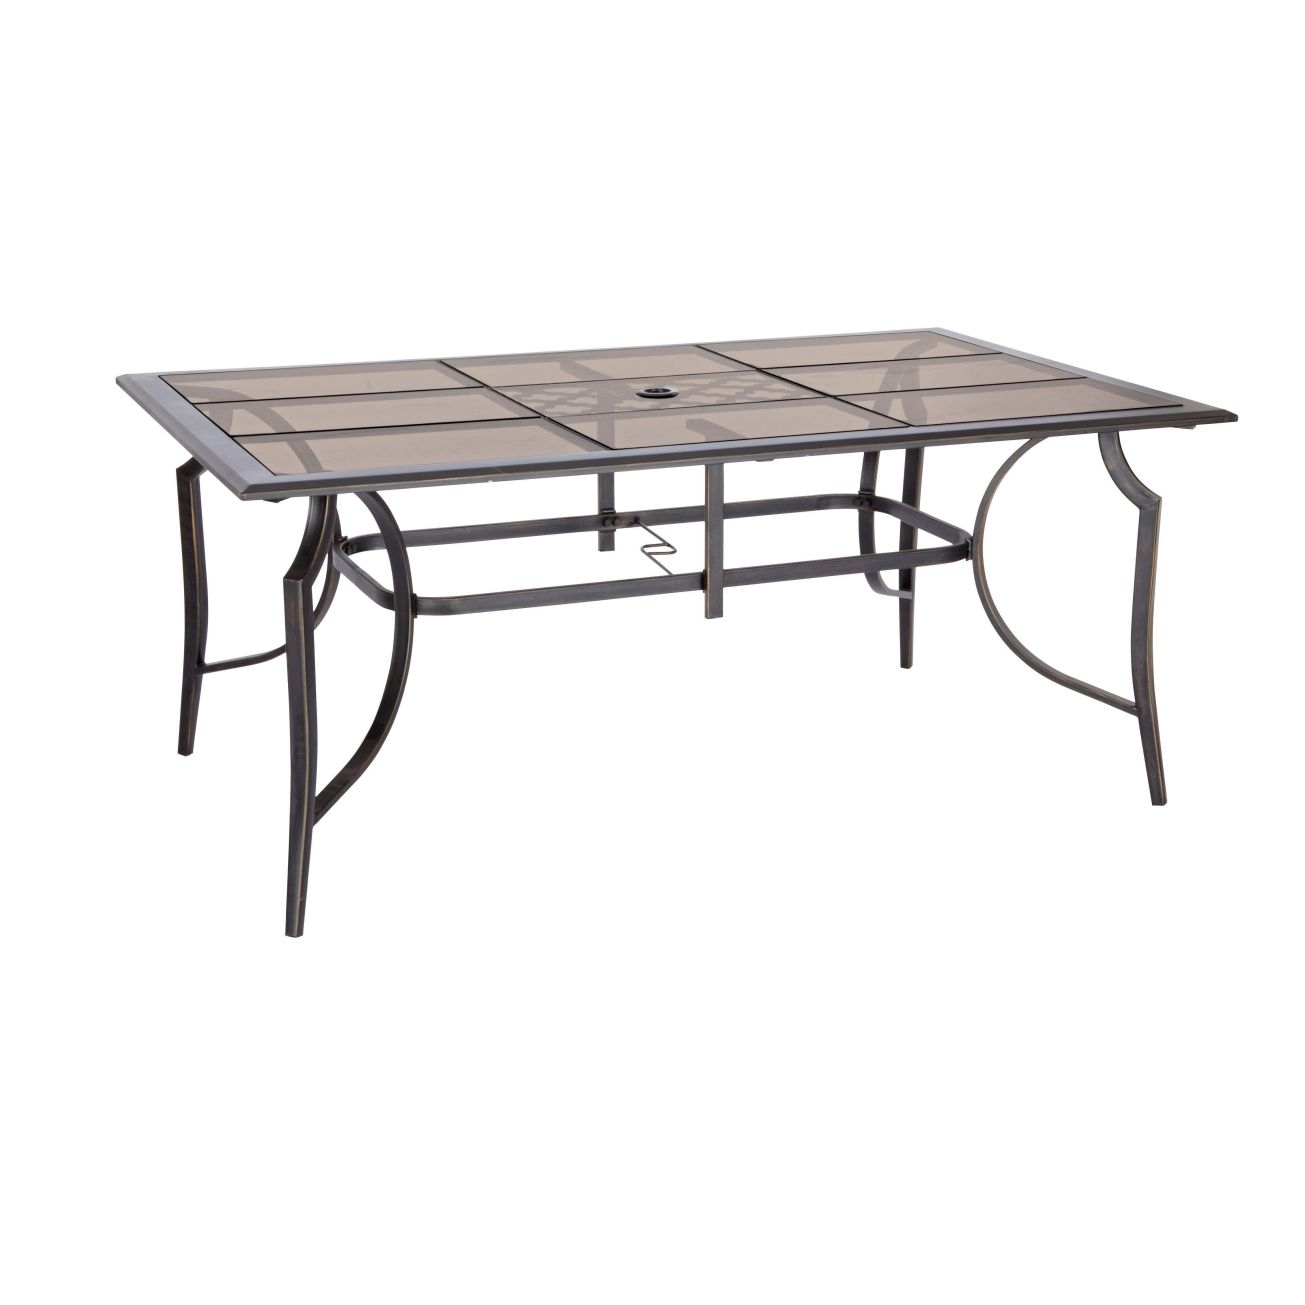 Living Accents St Charles Glass Top Dining Table Outdoor within sizing 1305 X 1305